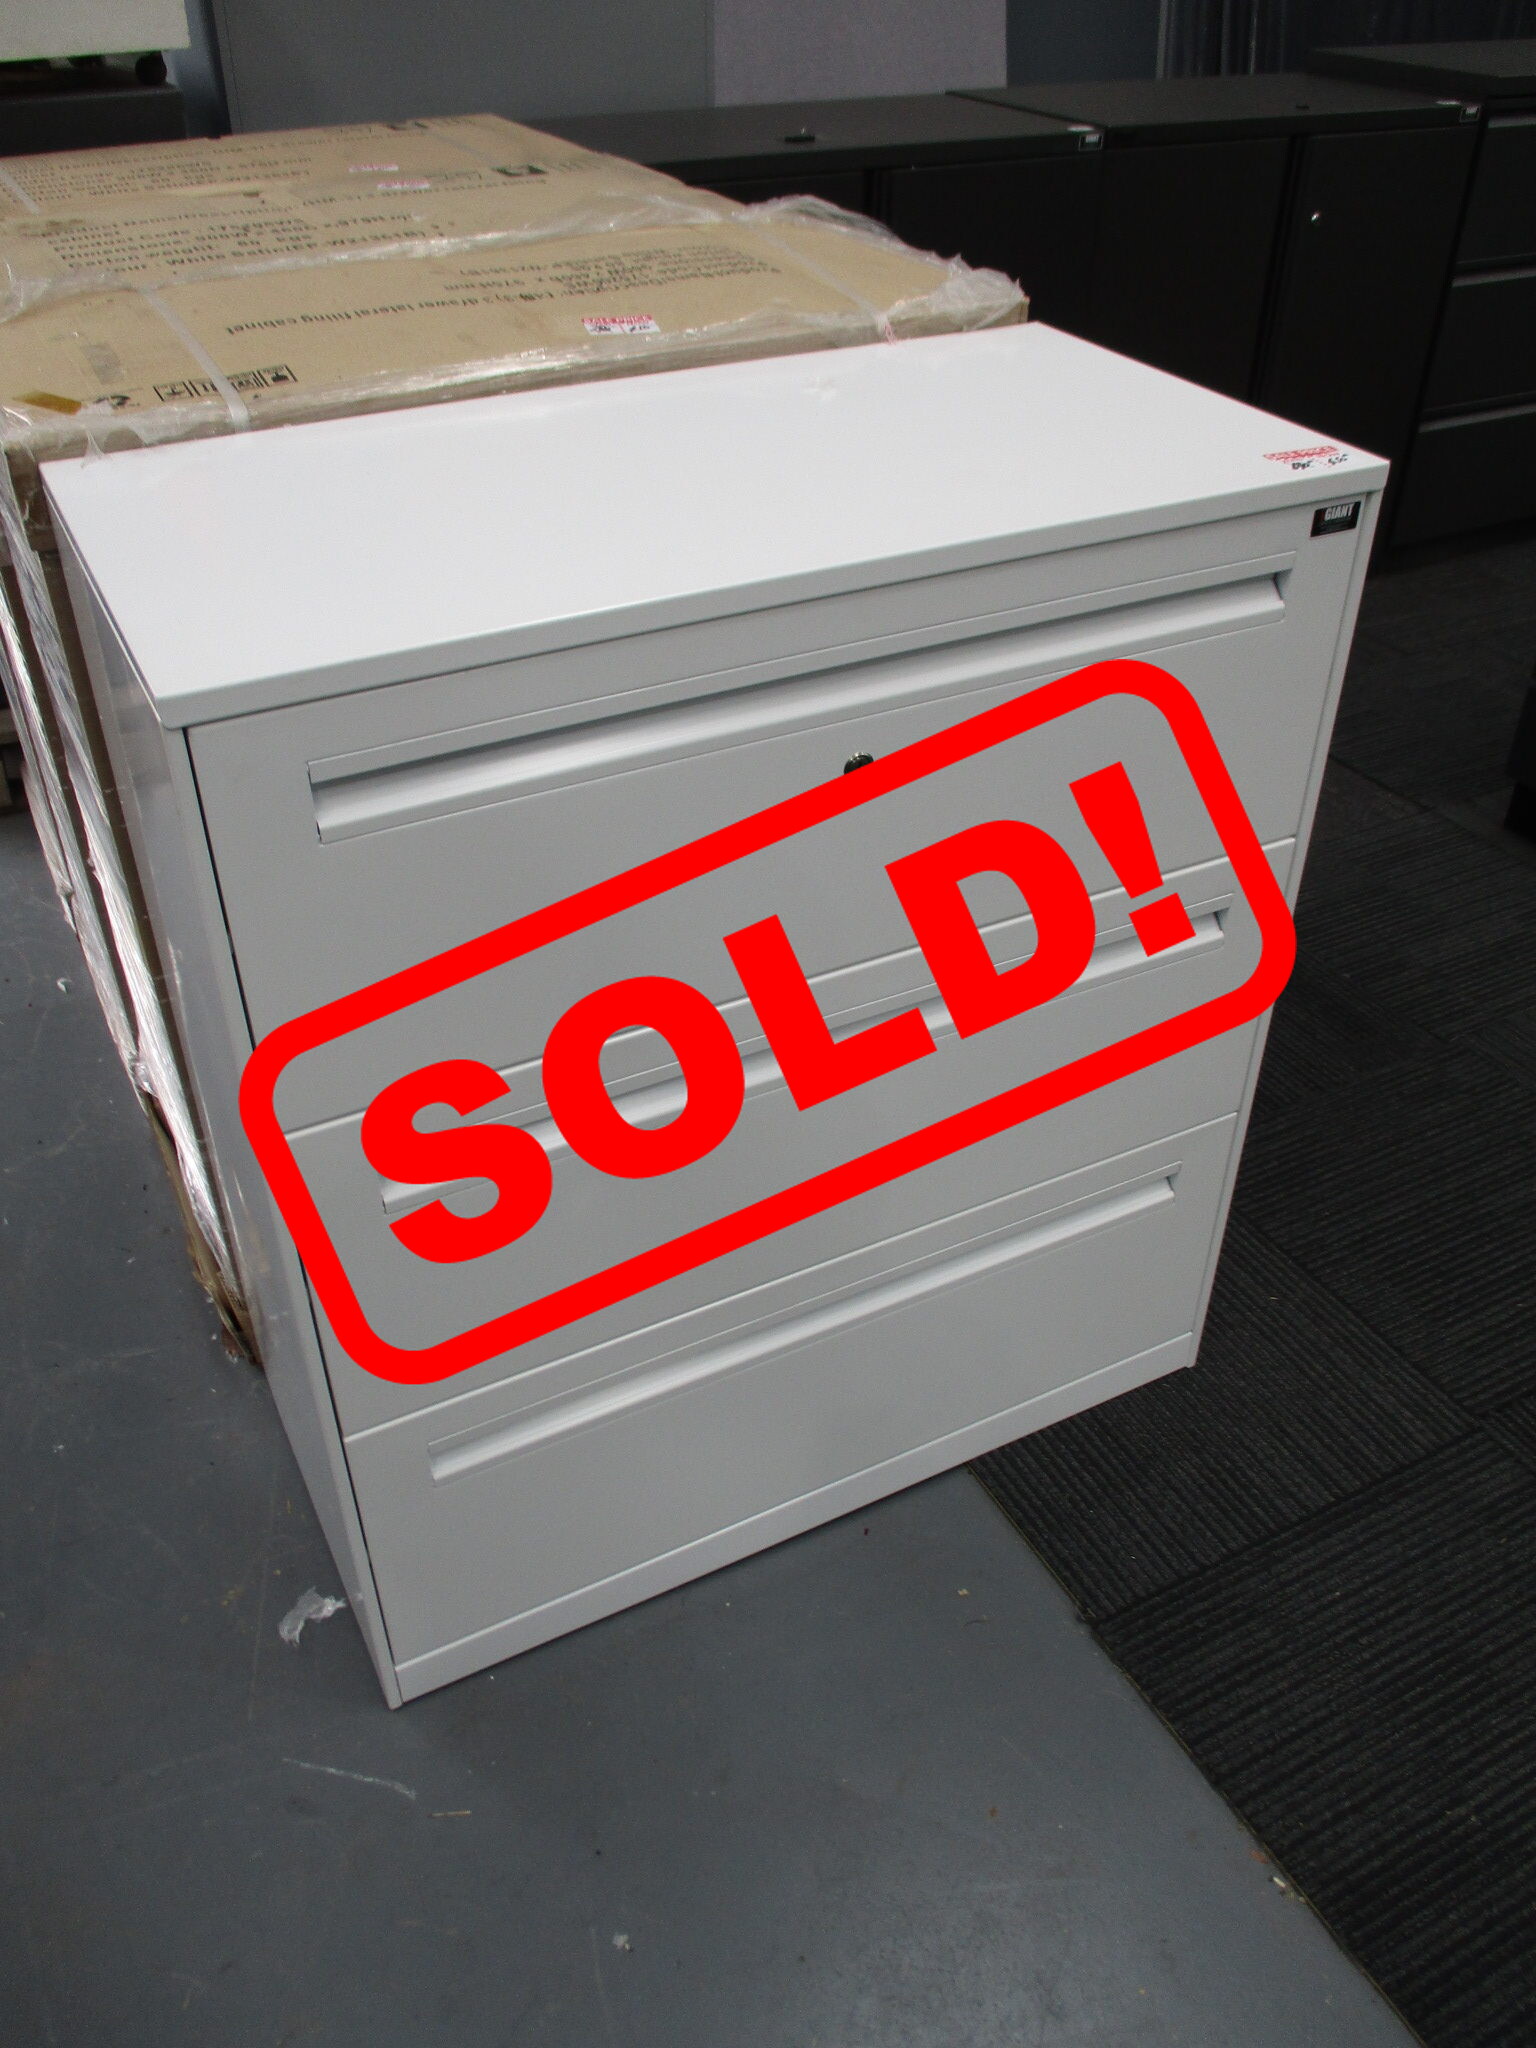 New Dexion 3 Drawer Lateral Filing Cabinets $450